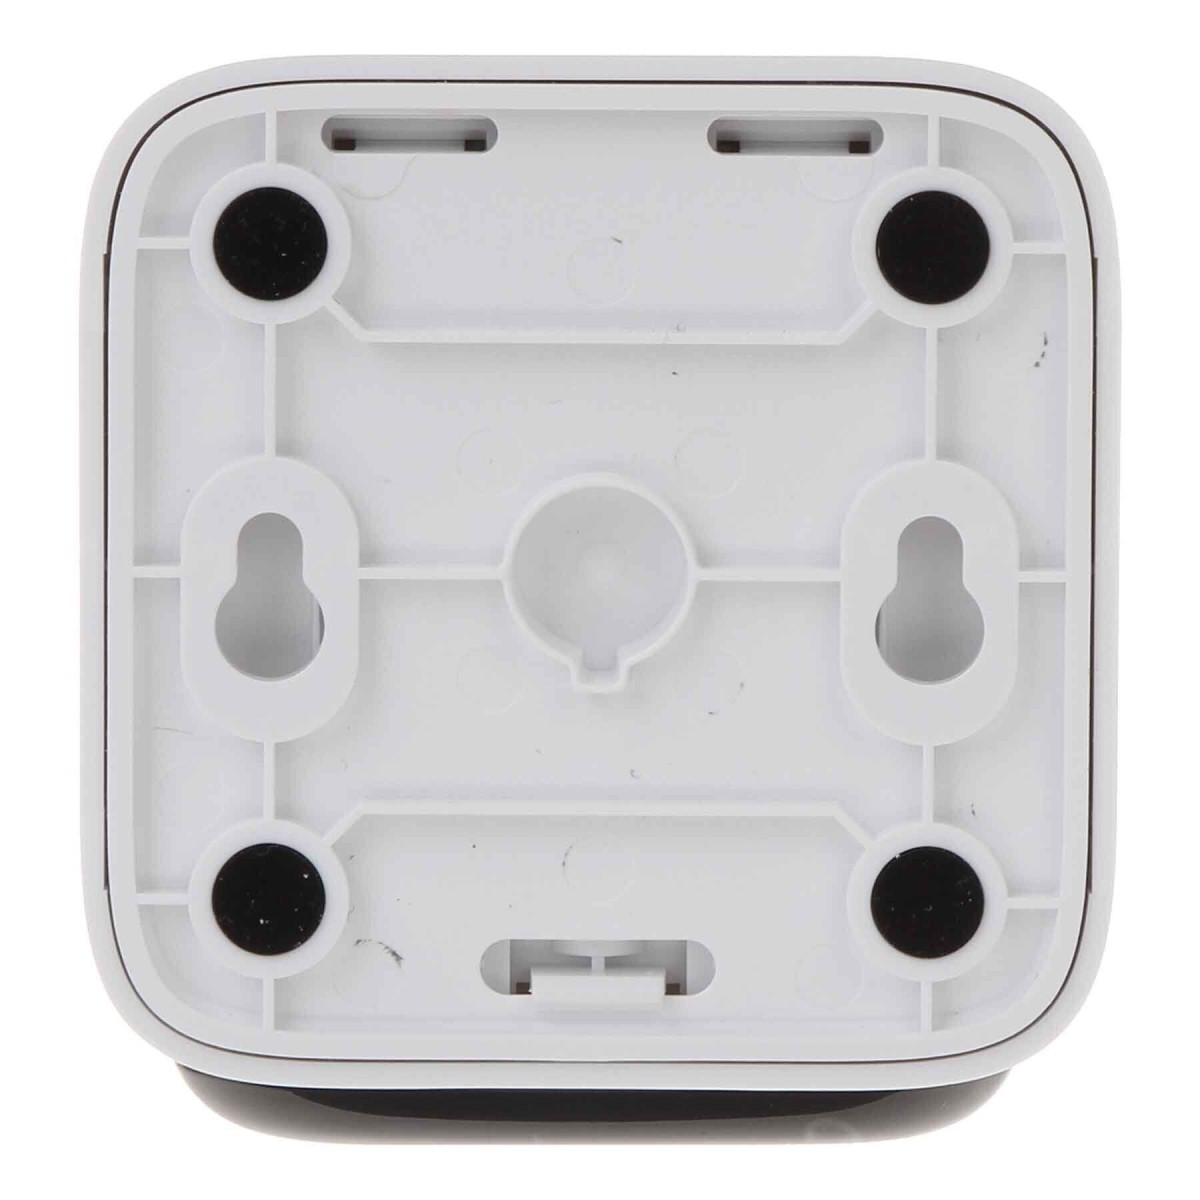 IP-камера Hikvision DS-2CD2455FWD-IW (2.8) 98_98.jpg - фото 8